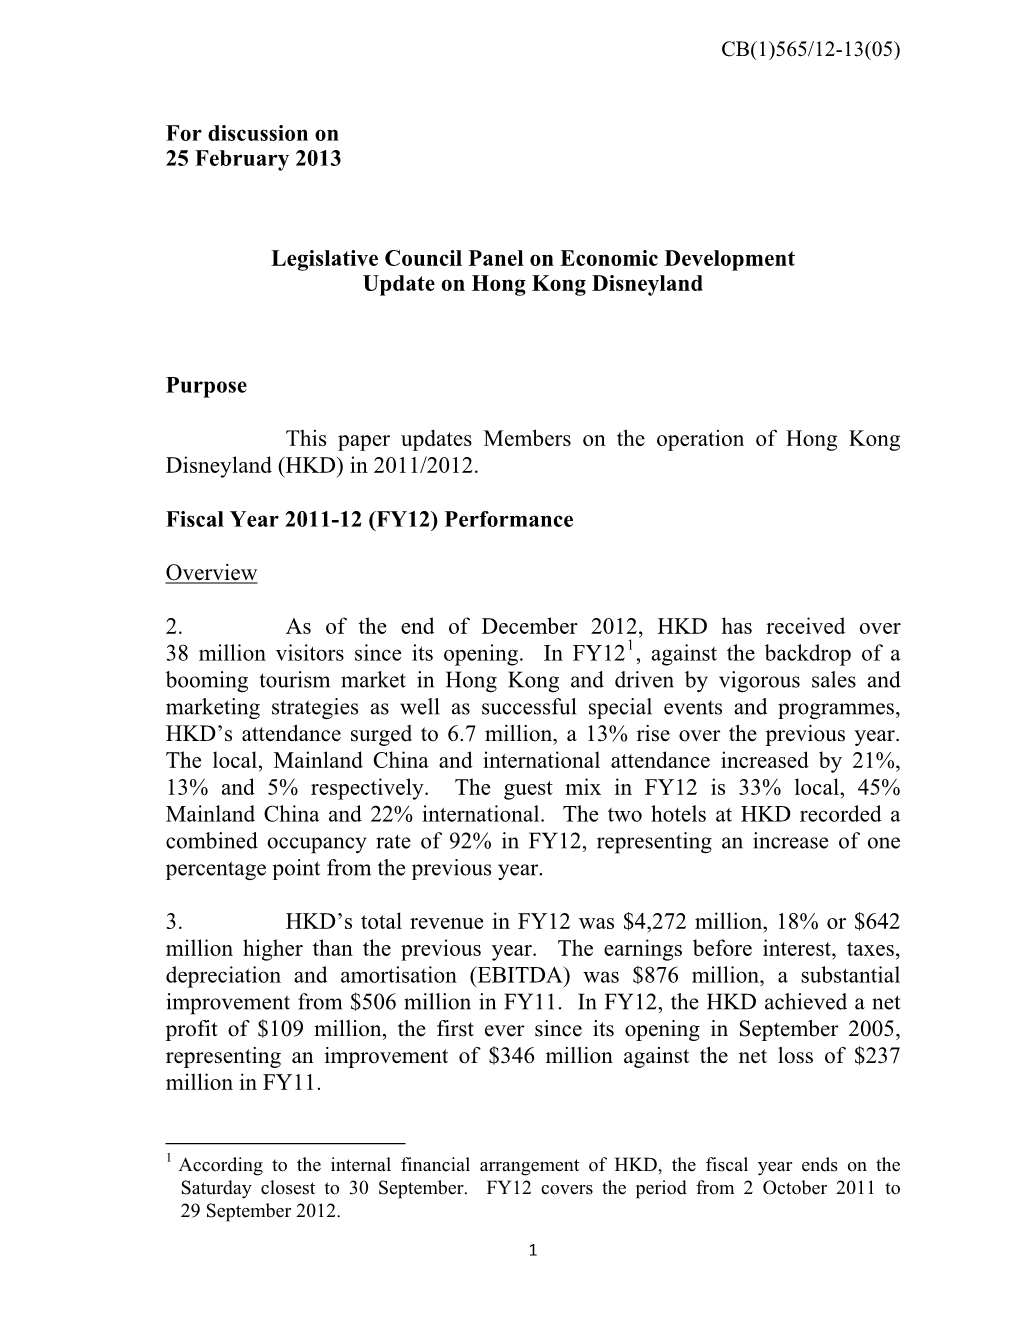 For Discussion on 25 February 2013 Legislative Council Panel on Economic Development Update on Hong Kong Disneyland Purpose This